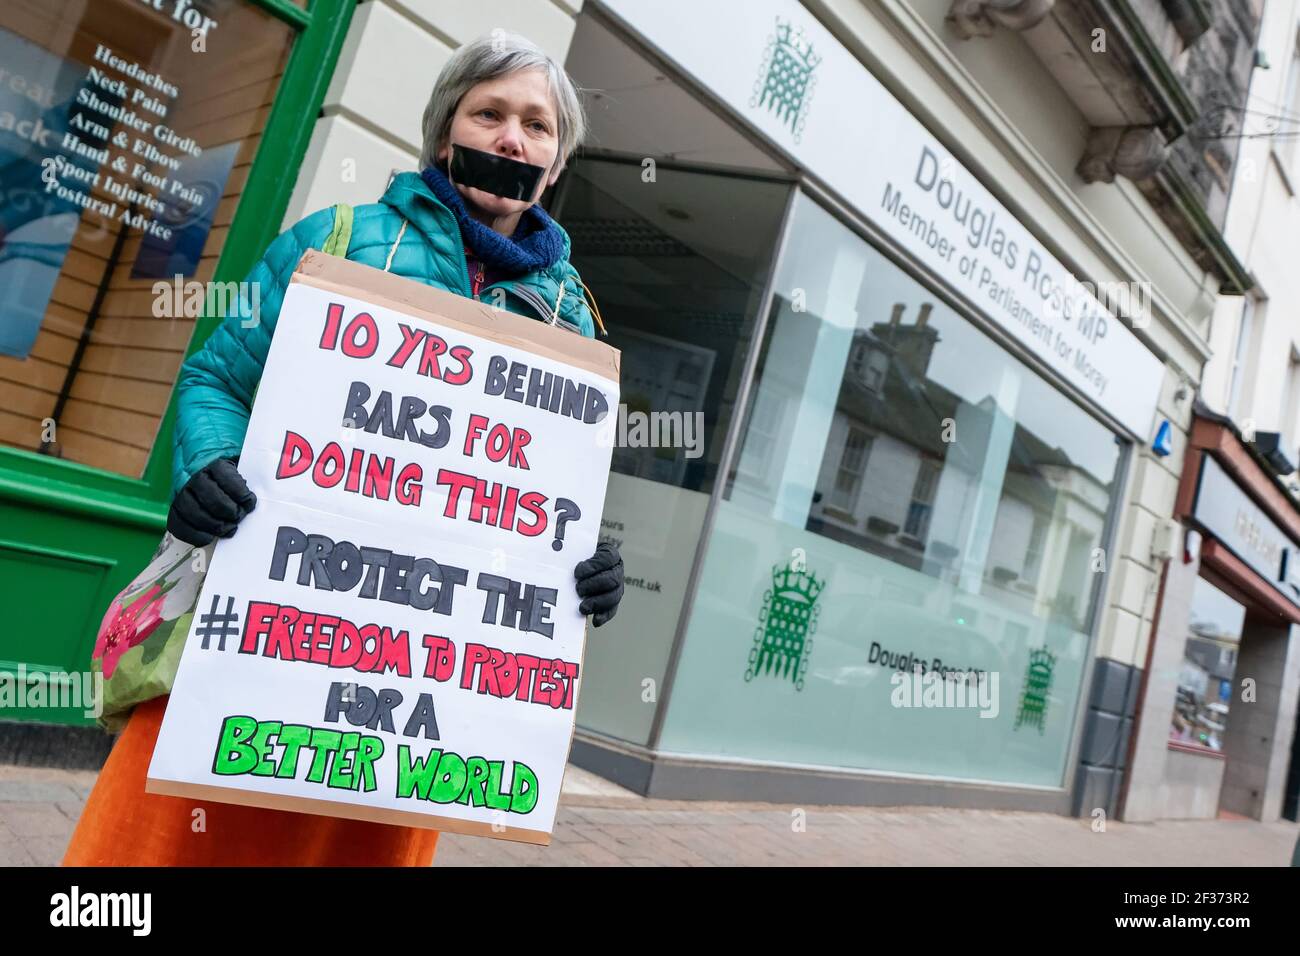 Outside MP Douglas Ross Office, High Street, Forres, Moray, UK. 15th Mar, 2021. UK. These are members from various groups in the Forres area protesting relative to the Police Bill and Freedom to Protest. Credit: JASPERIMAGE/Alamy Live News Stock Photo